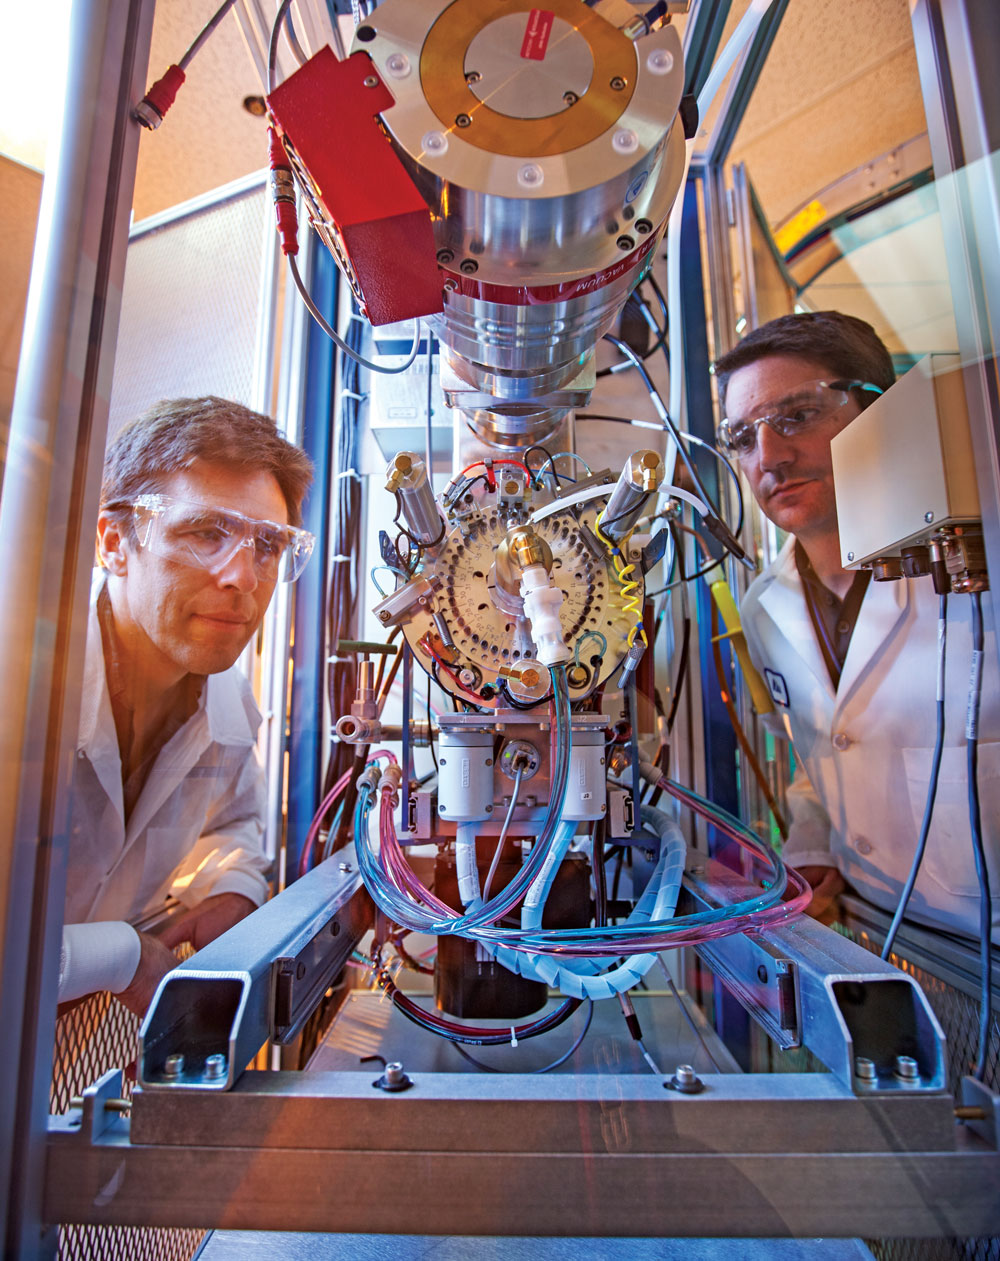 Two scientists peer into an accelerated mass spectrometry unit.